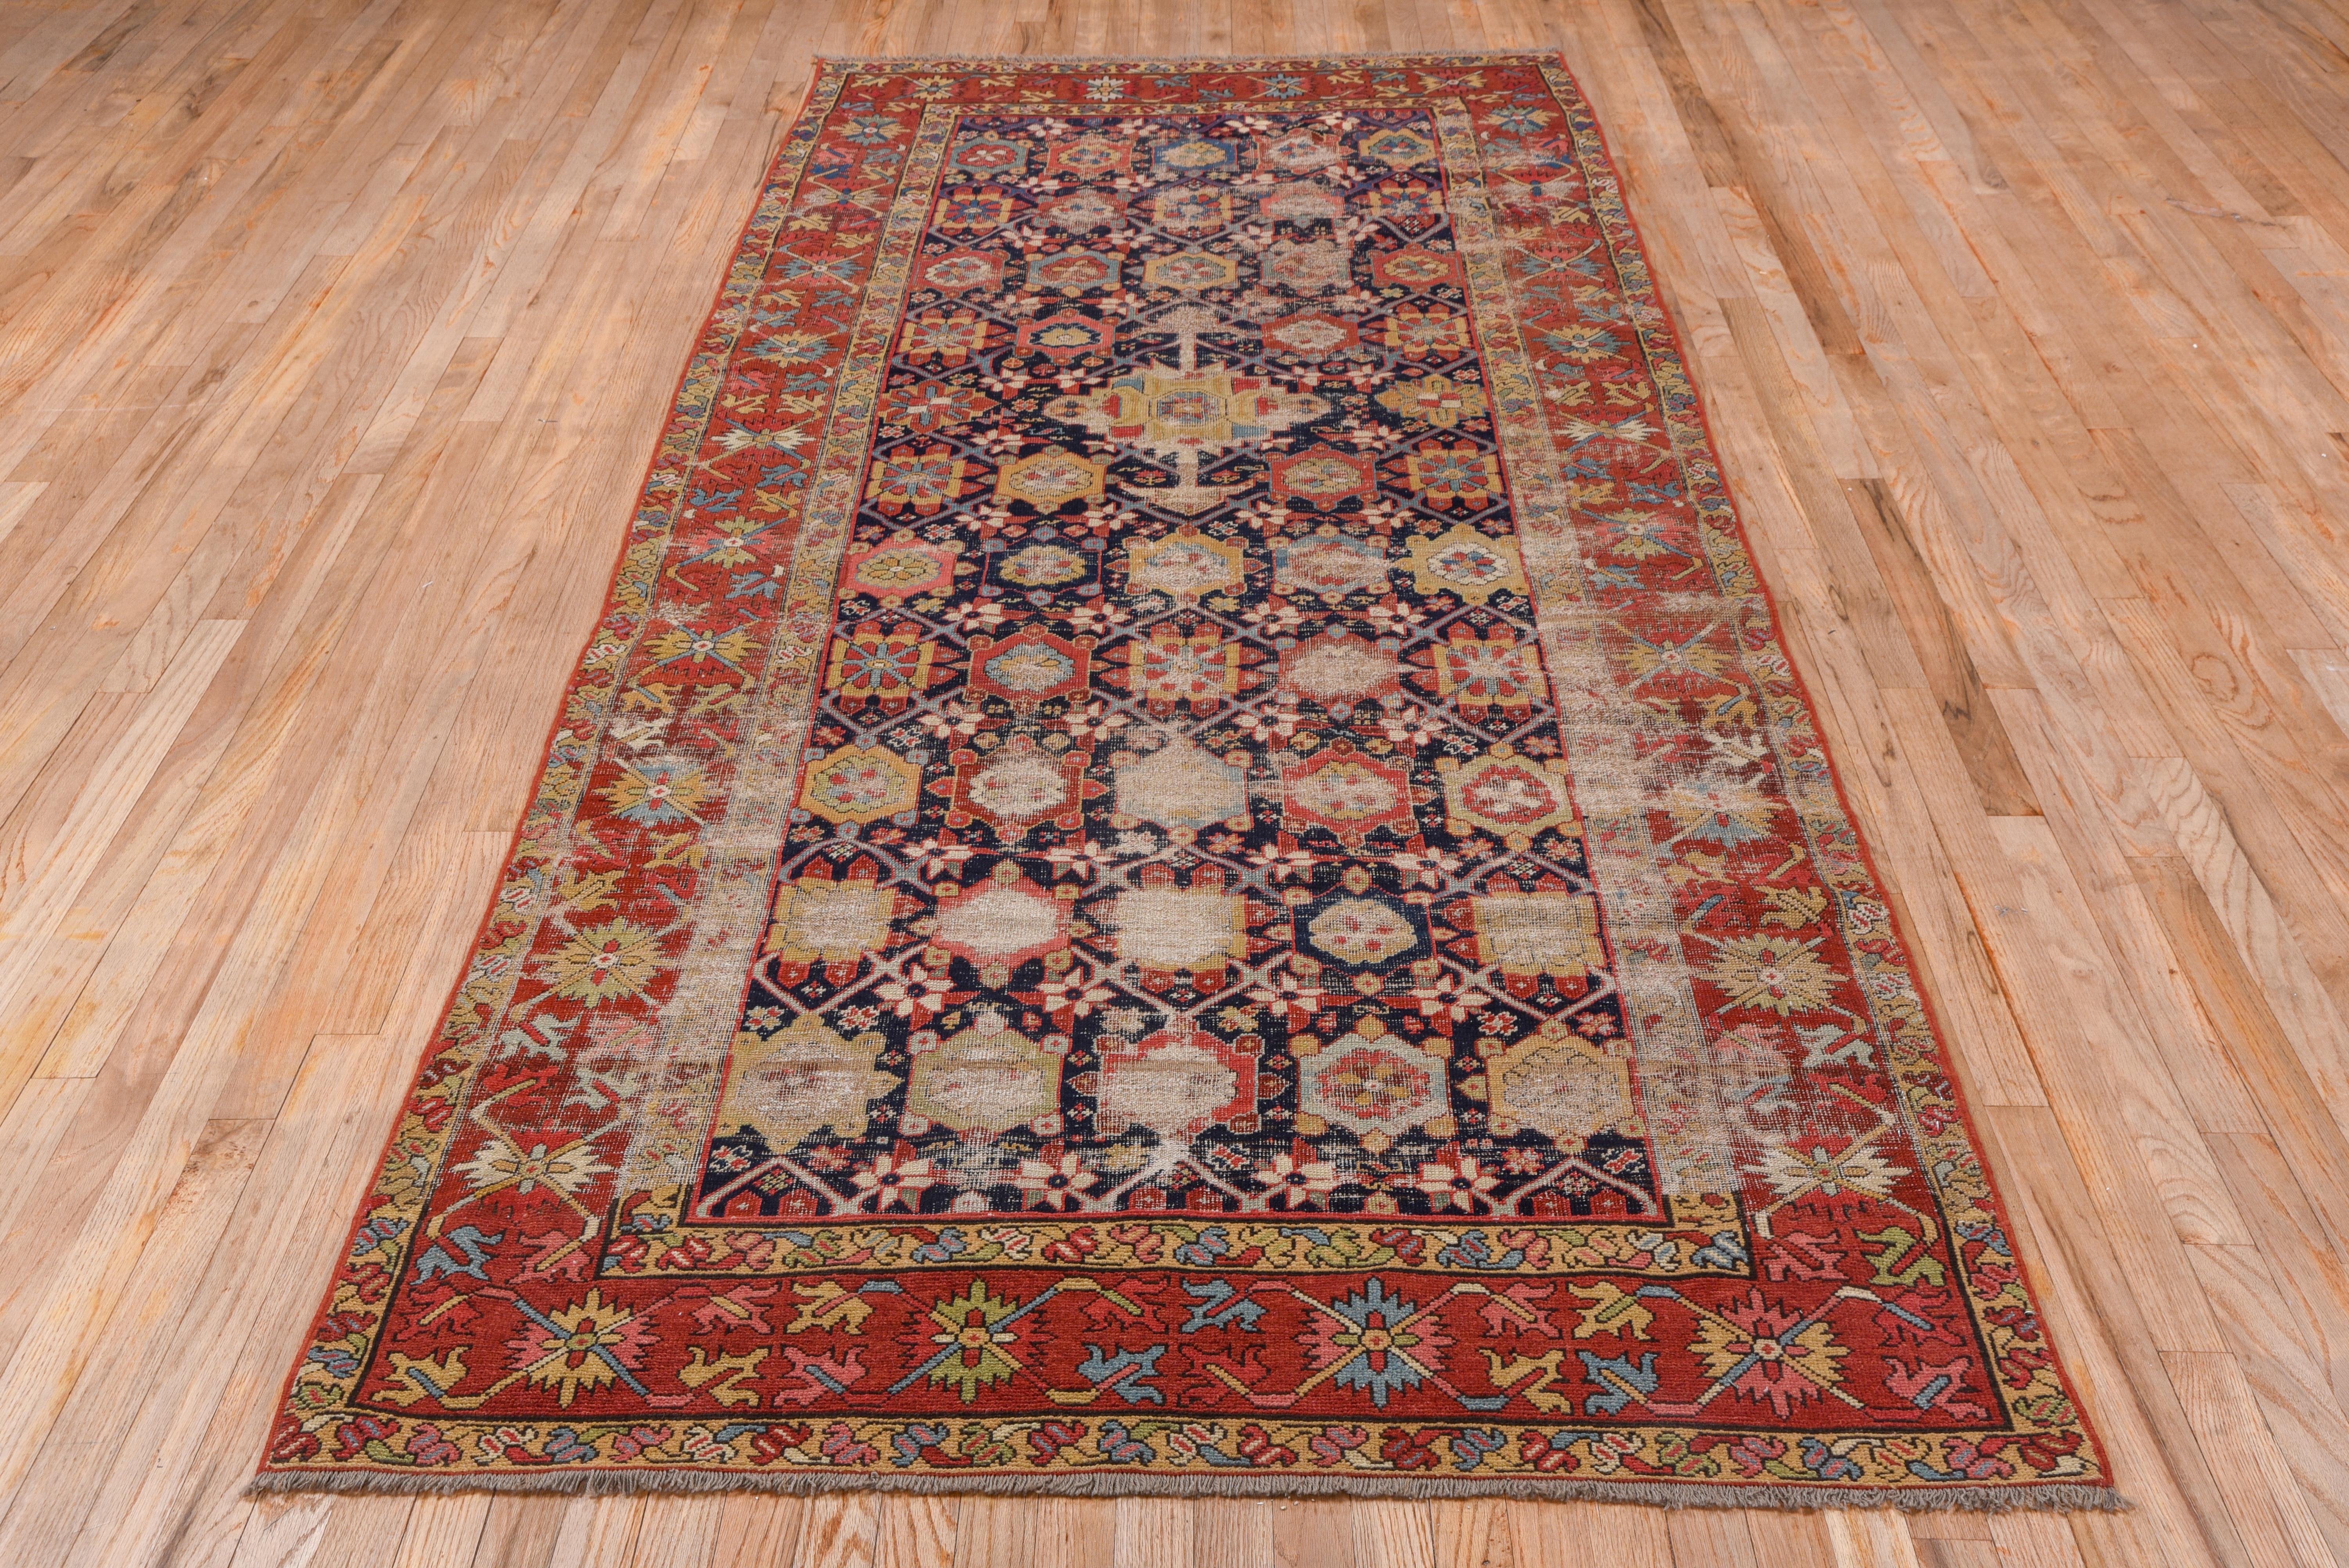 This south Caucasian long rug retains the characteristic dark blue field with its geometric rendering of the Persian Mina Khani rosette trellis design, set within a red crab palmette border.